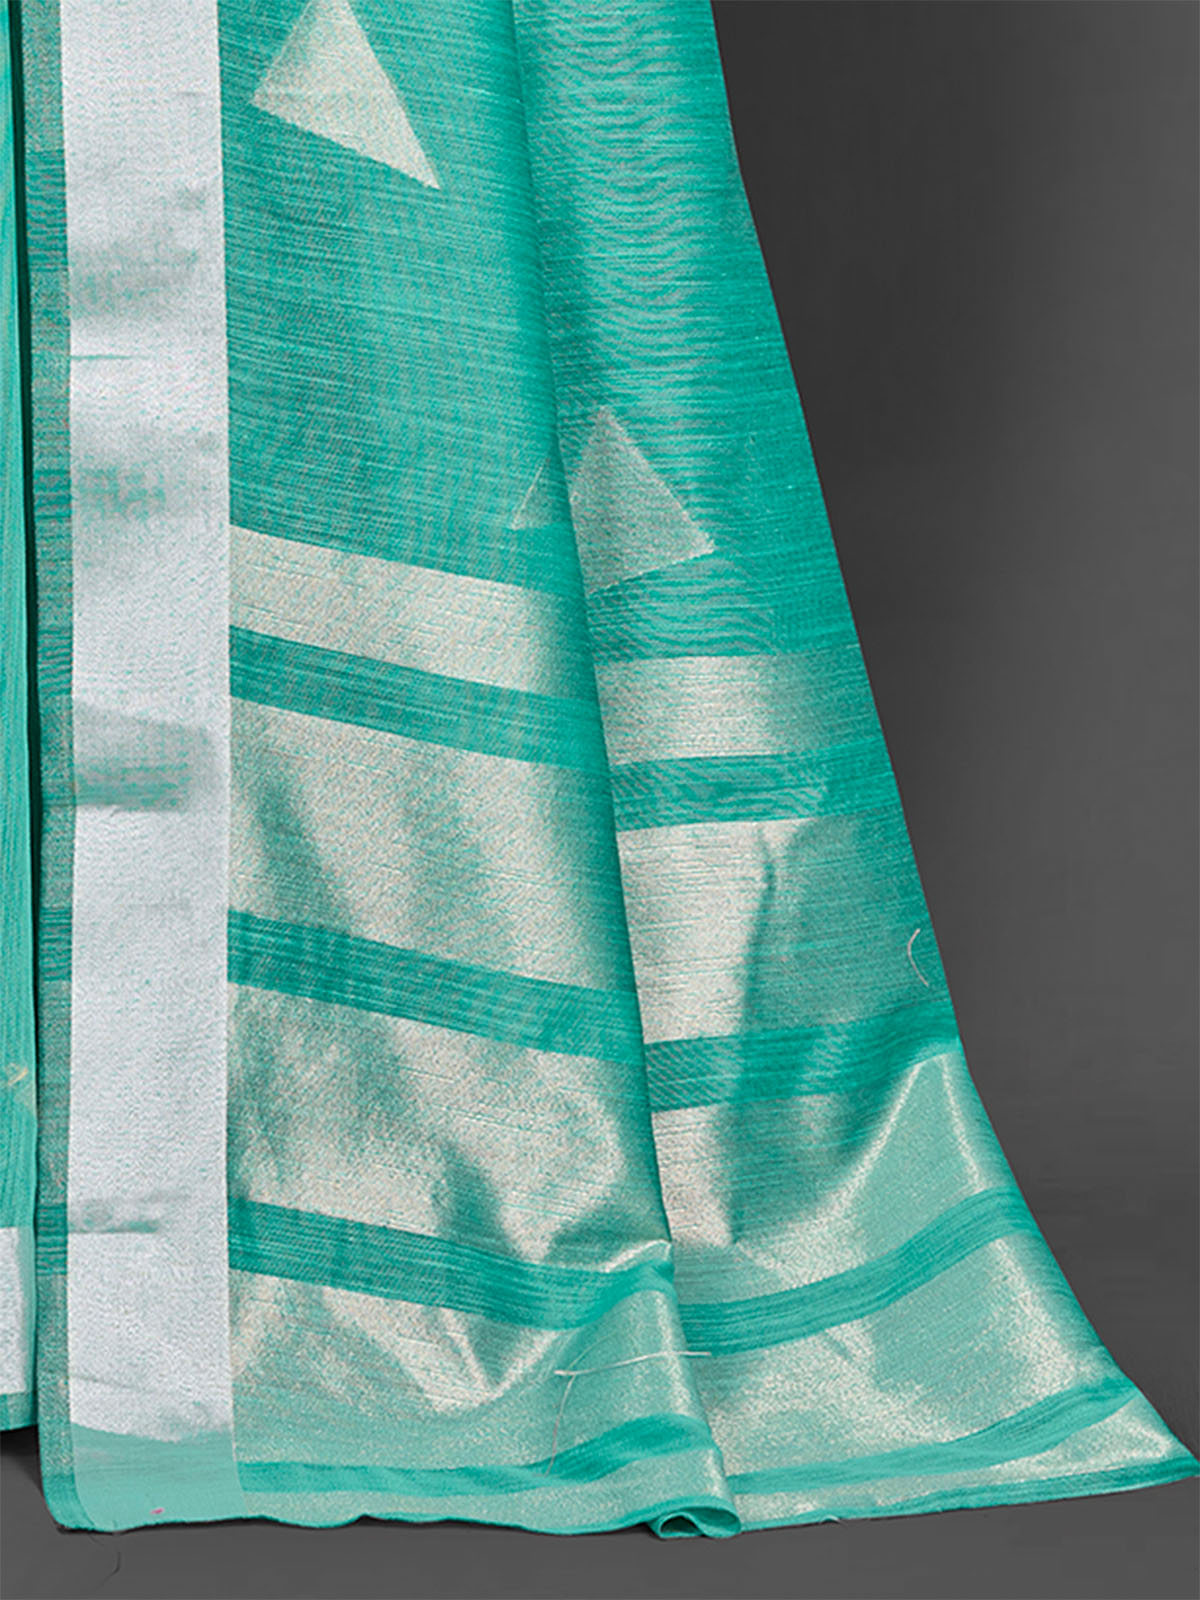 Odette Women Linen Sea Green Woven Designer Saree With Unstitched Blouse